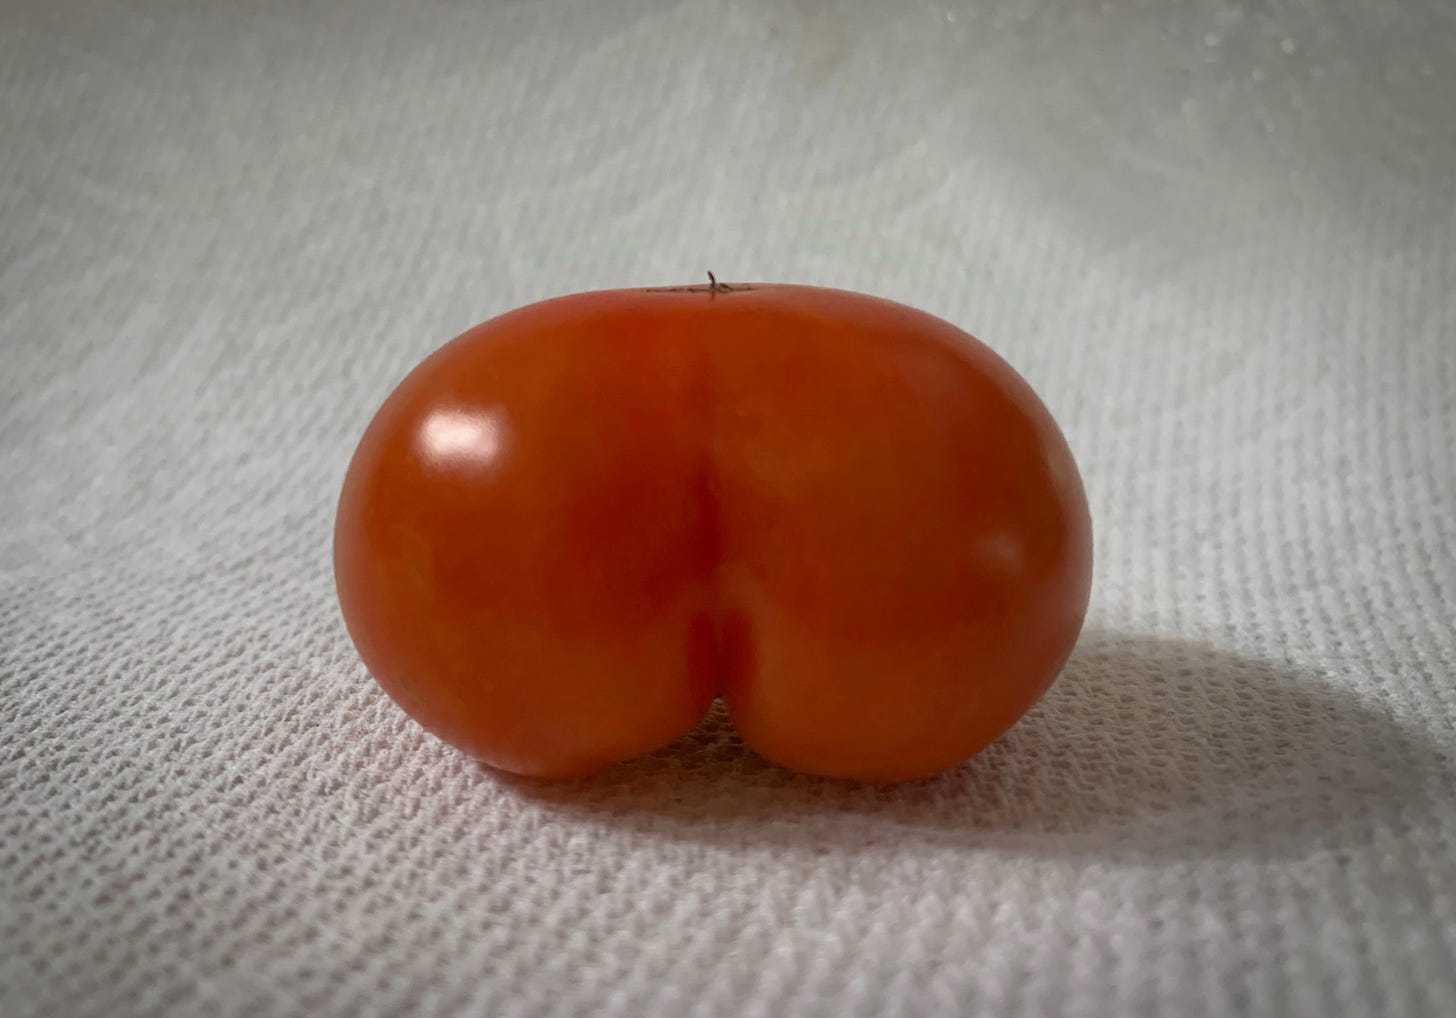 A bright red tomato on a white paper towel. The shape of the tomato facing front resembles the shape of a human butt.